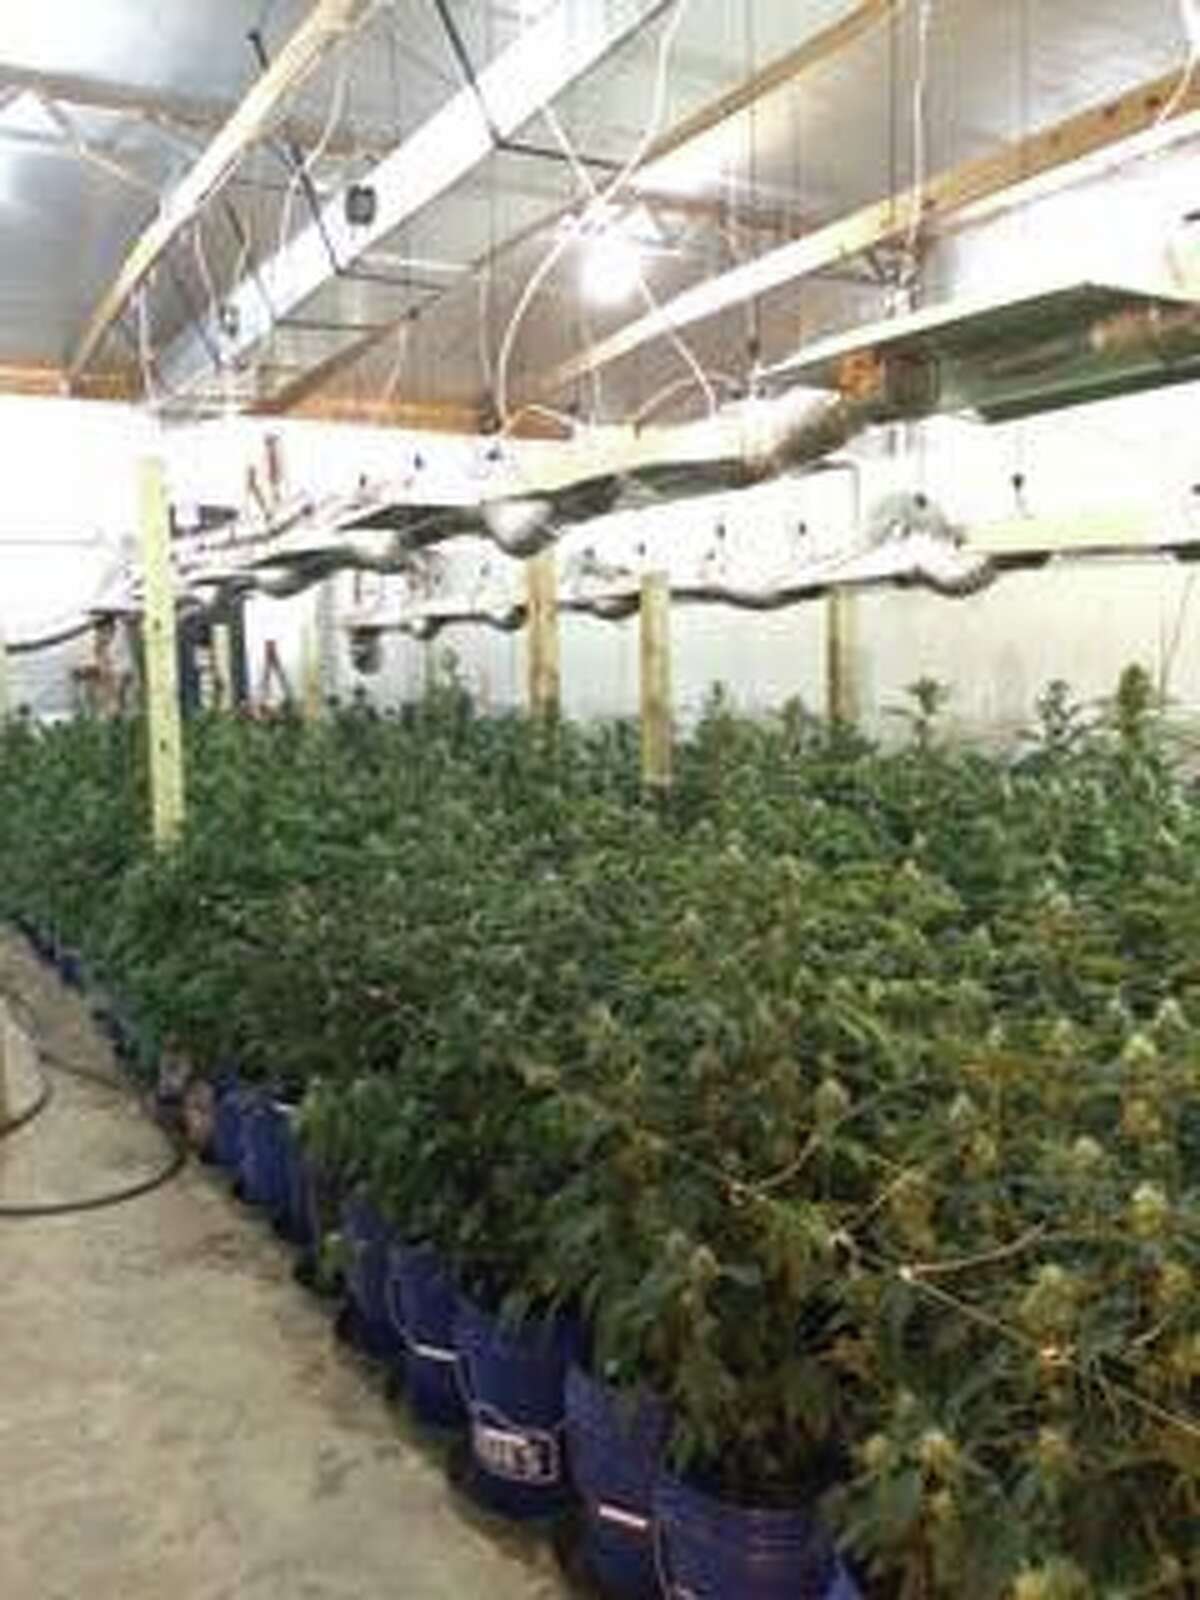 The Brazoria County Narcotics Task Force seized more than 3,000 pot plants Tuesday morning. 